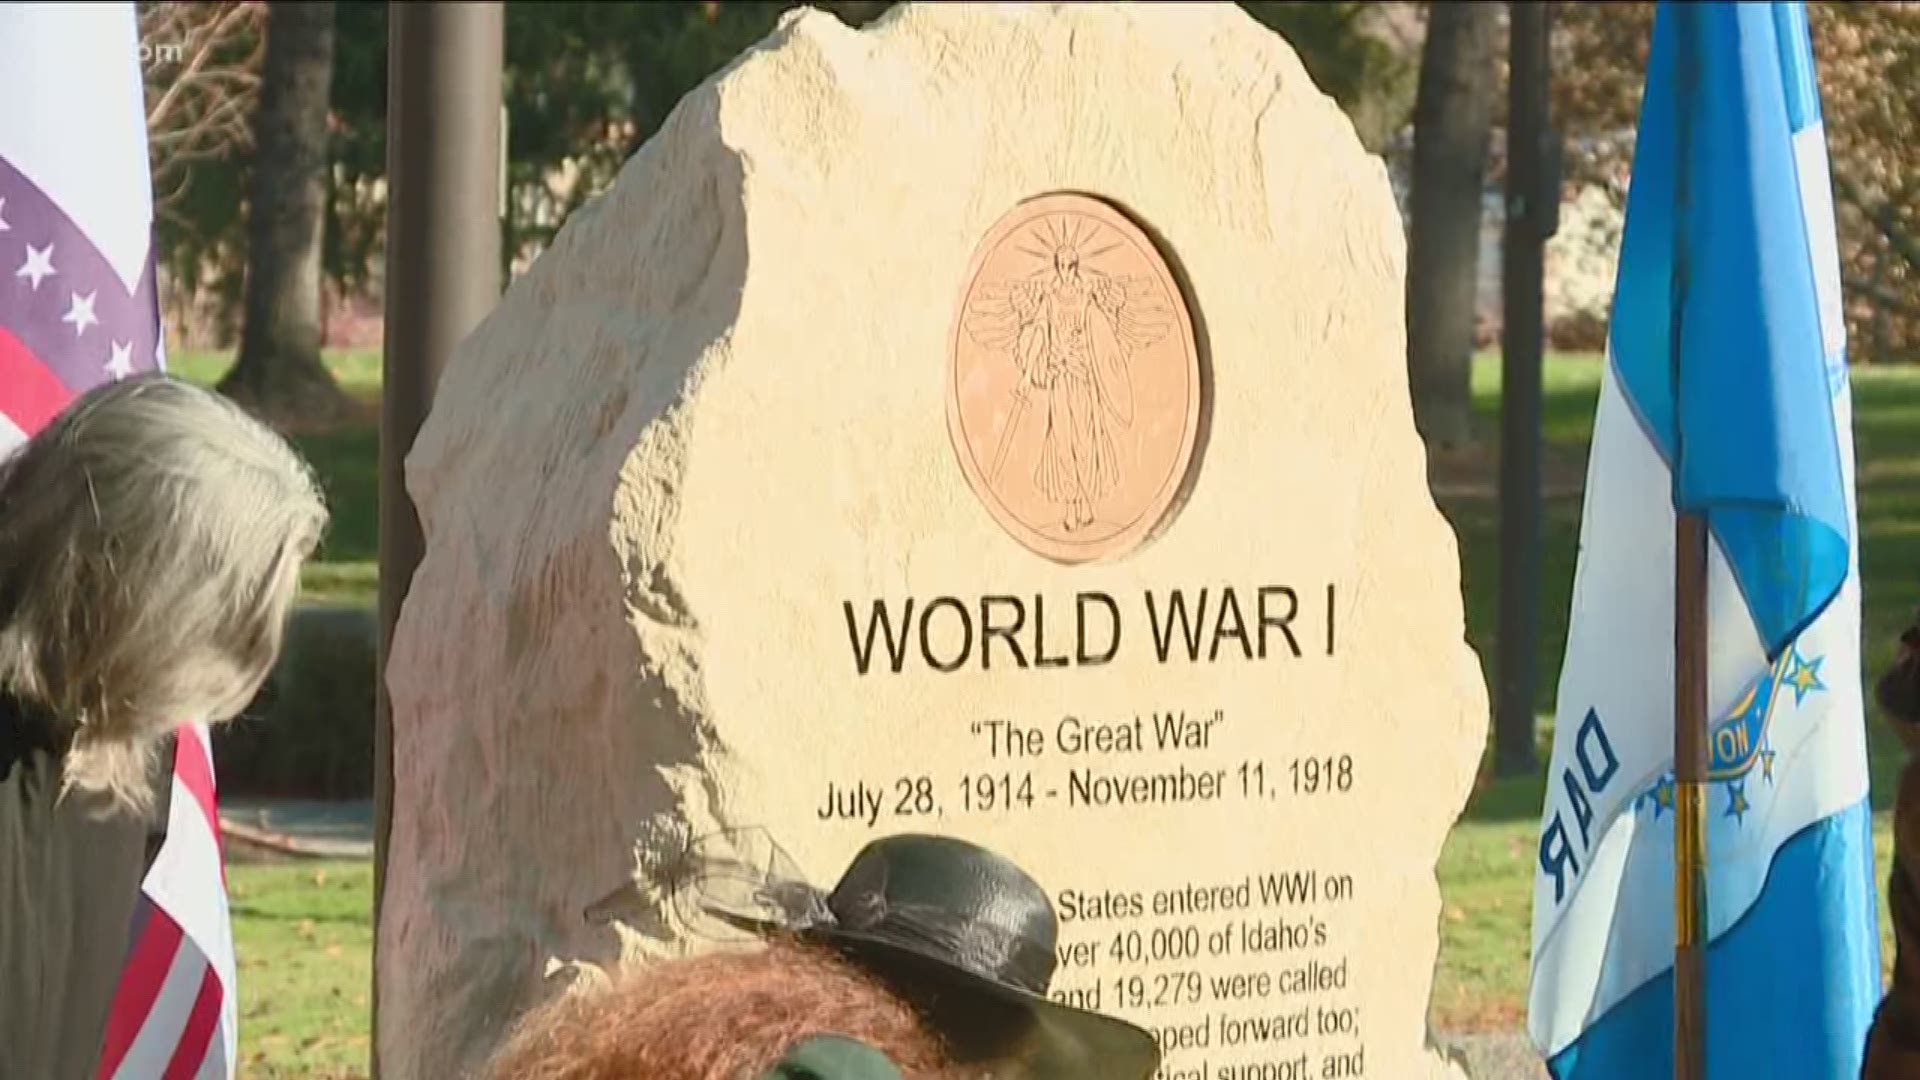 In addition to being Veterans Day, Sunday was also the 100th anniversary of the end of WWI.